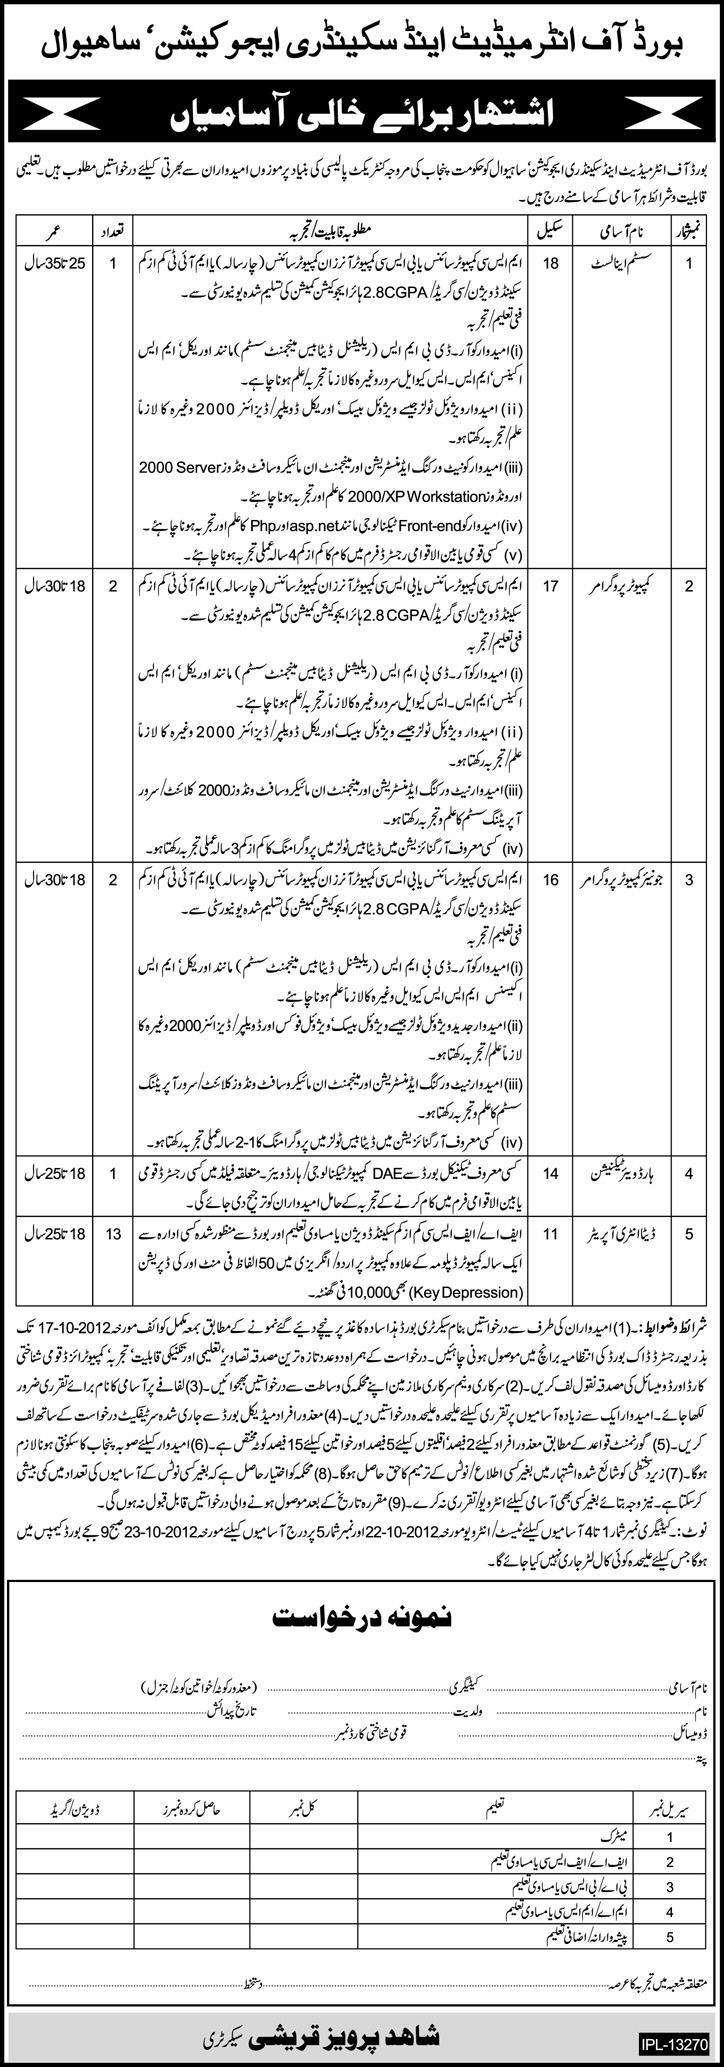 BISE Board of Intermediate and Secondary Education Sahiwal Requires IT Staff (Government Job)